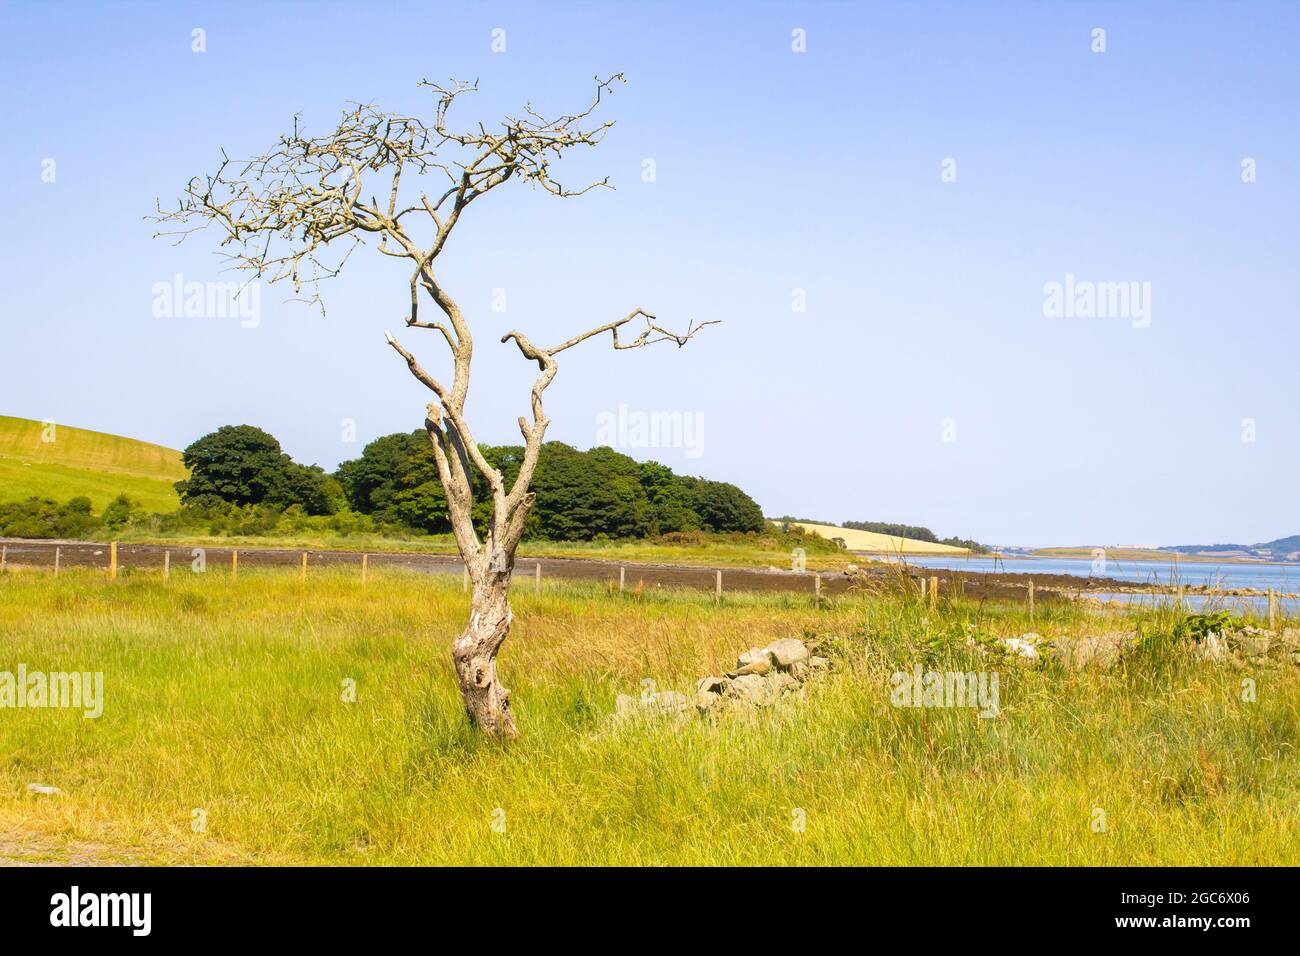 A dead Common Hawthorn tree Crataegus Monogyna on the National Trust property at Gibbs Island in County Down Northern Ireland. taken on a hot day Stock Photo